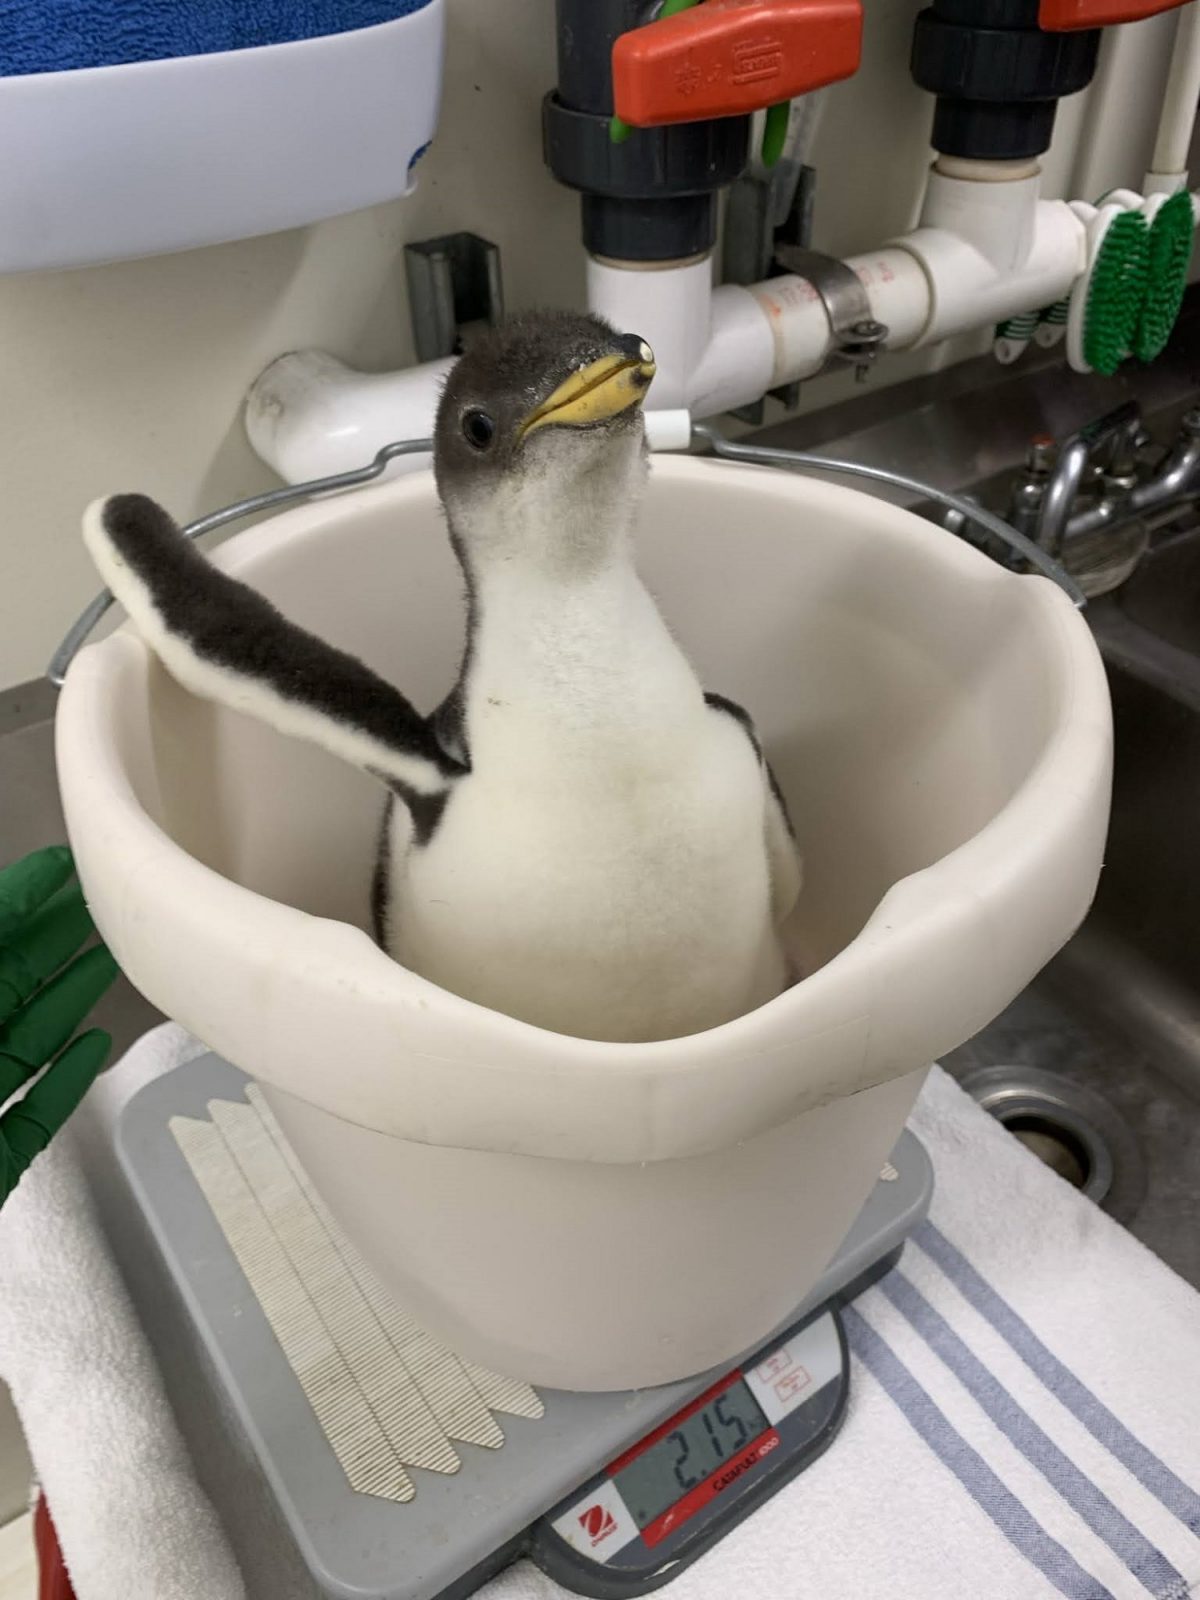 The Tennessee Aquarium's Gentoo Penguin chick weighs more than two kilograms at just 28 days old